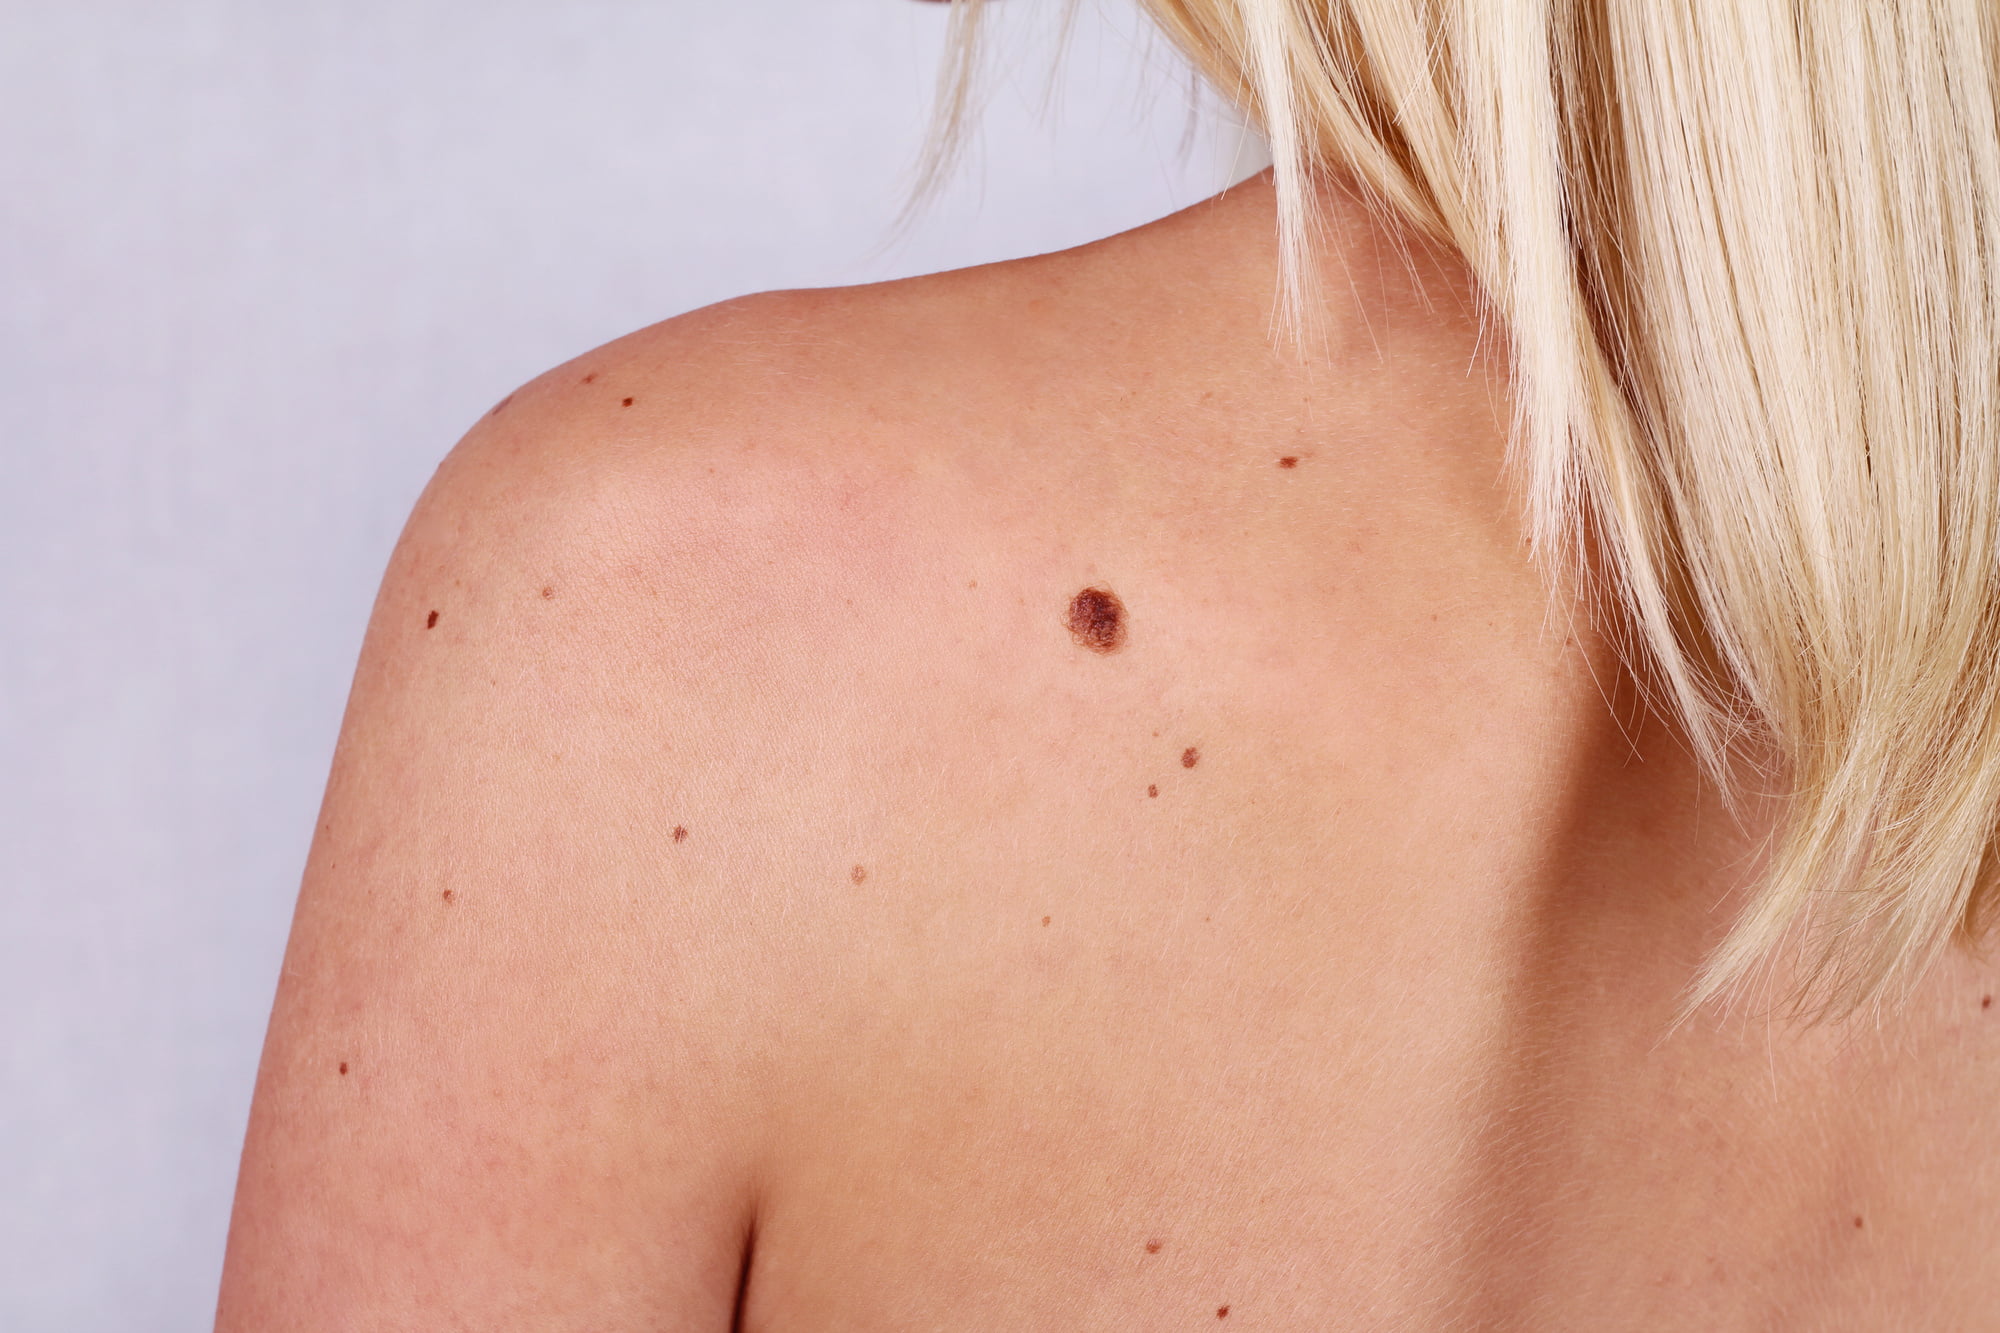 Having a comprehensive skin check done helps detect abnormalities and possible signs of skin cancer. Here's why you should schedule a skin check.